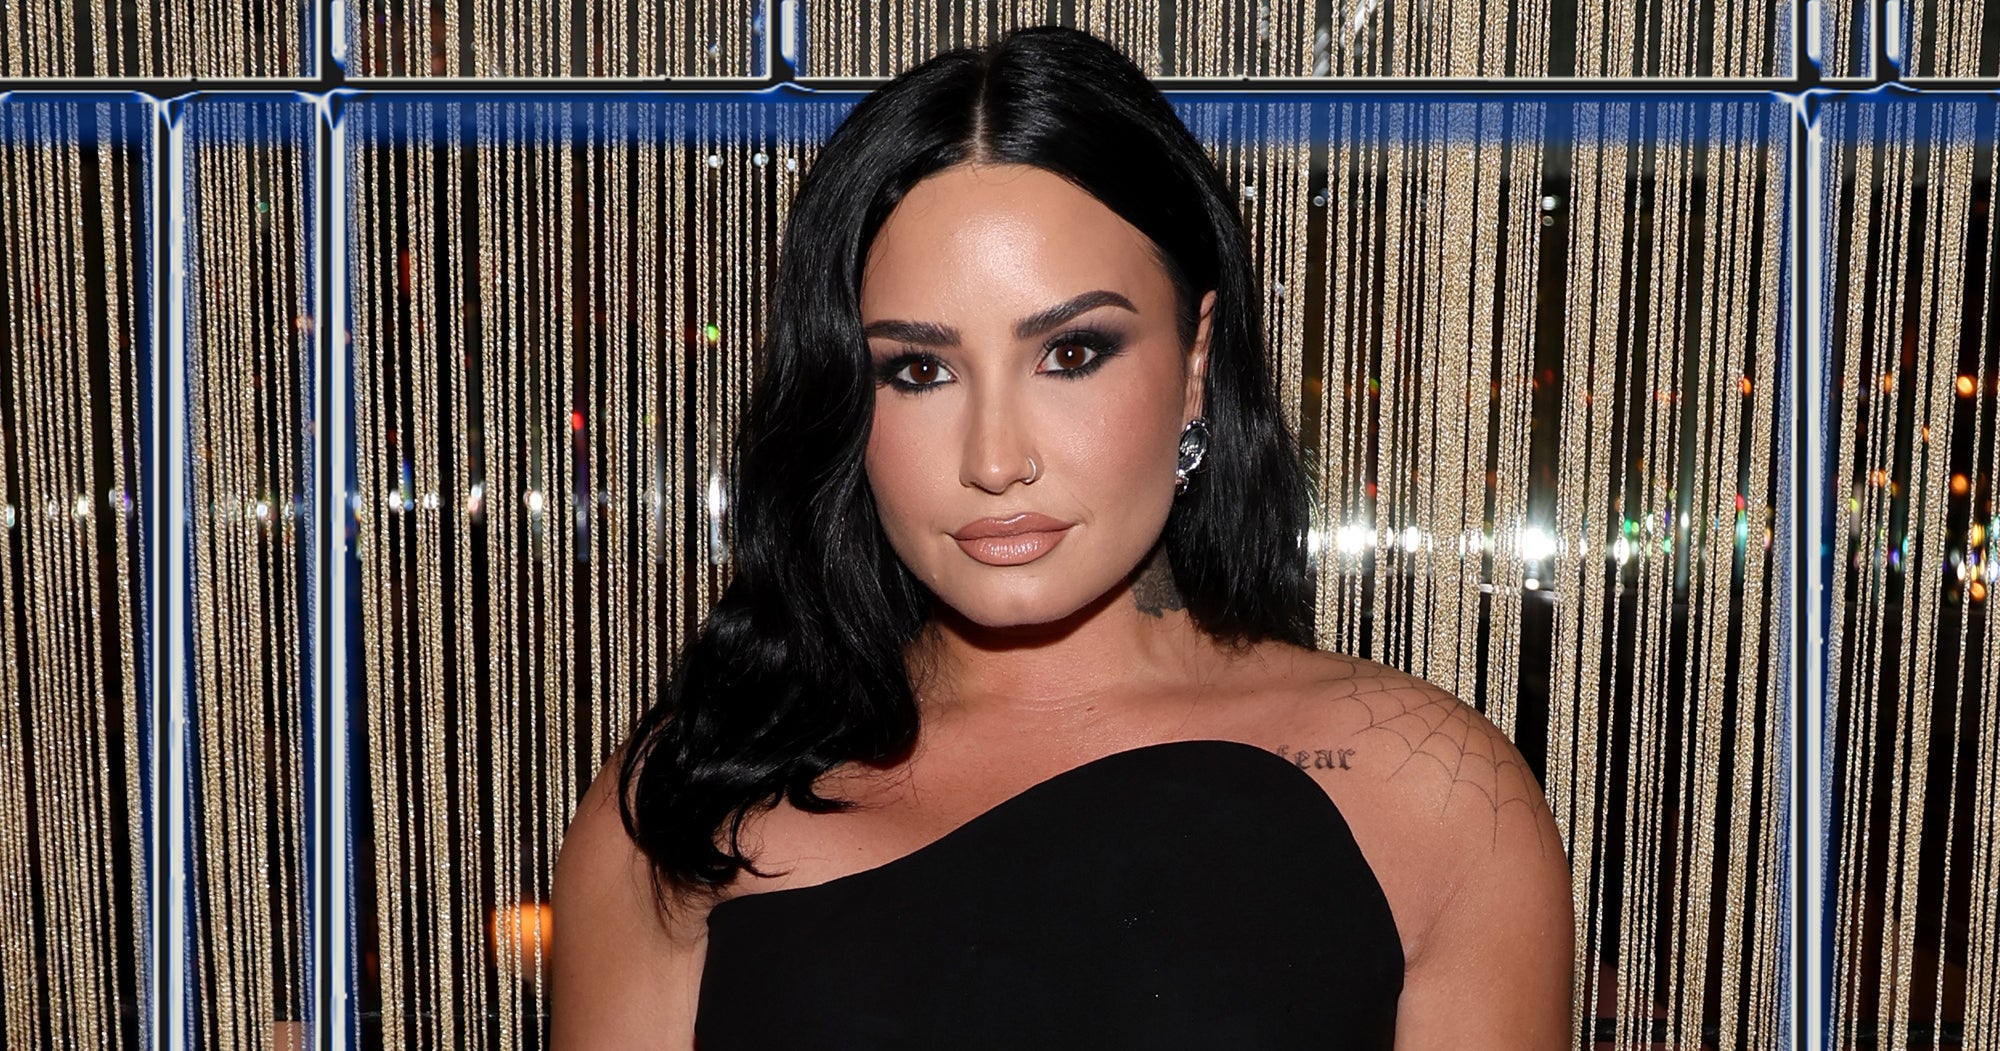 Charles & Keith X Chet Lo Collaboration Is Demi Lovato-Approved